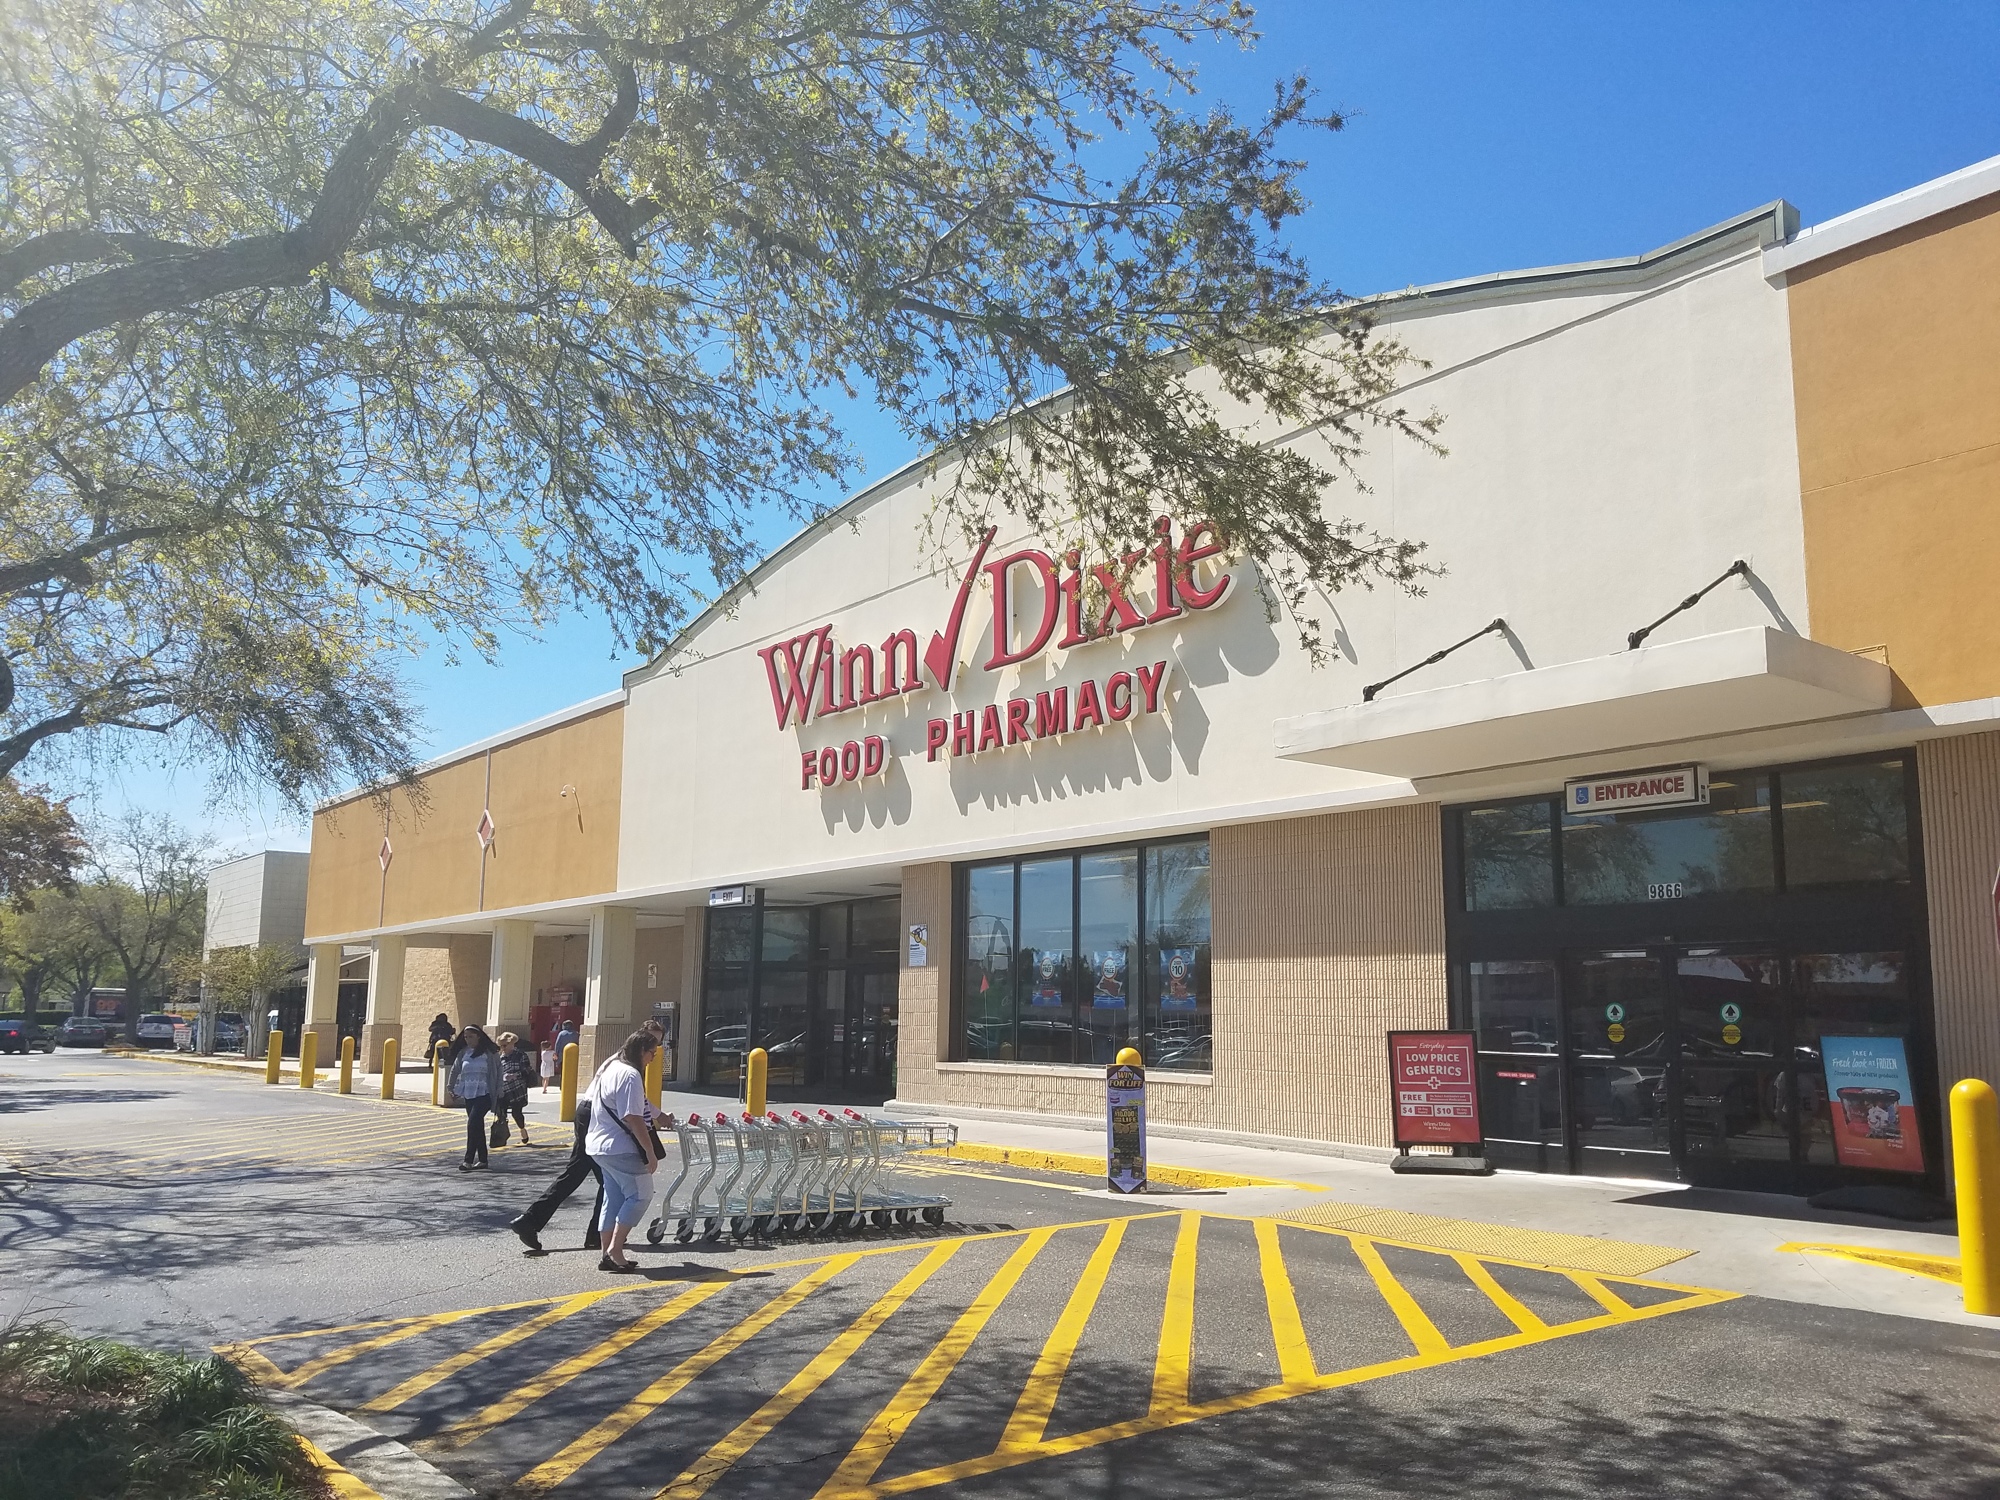 Southeastern Grocers, the parent company of Winn-Dixie, emerged from Chapter 11 bankruptcy in March.